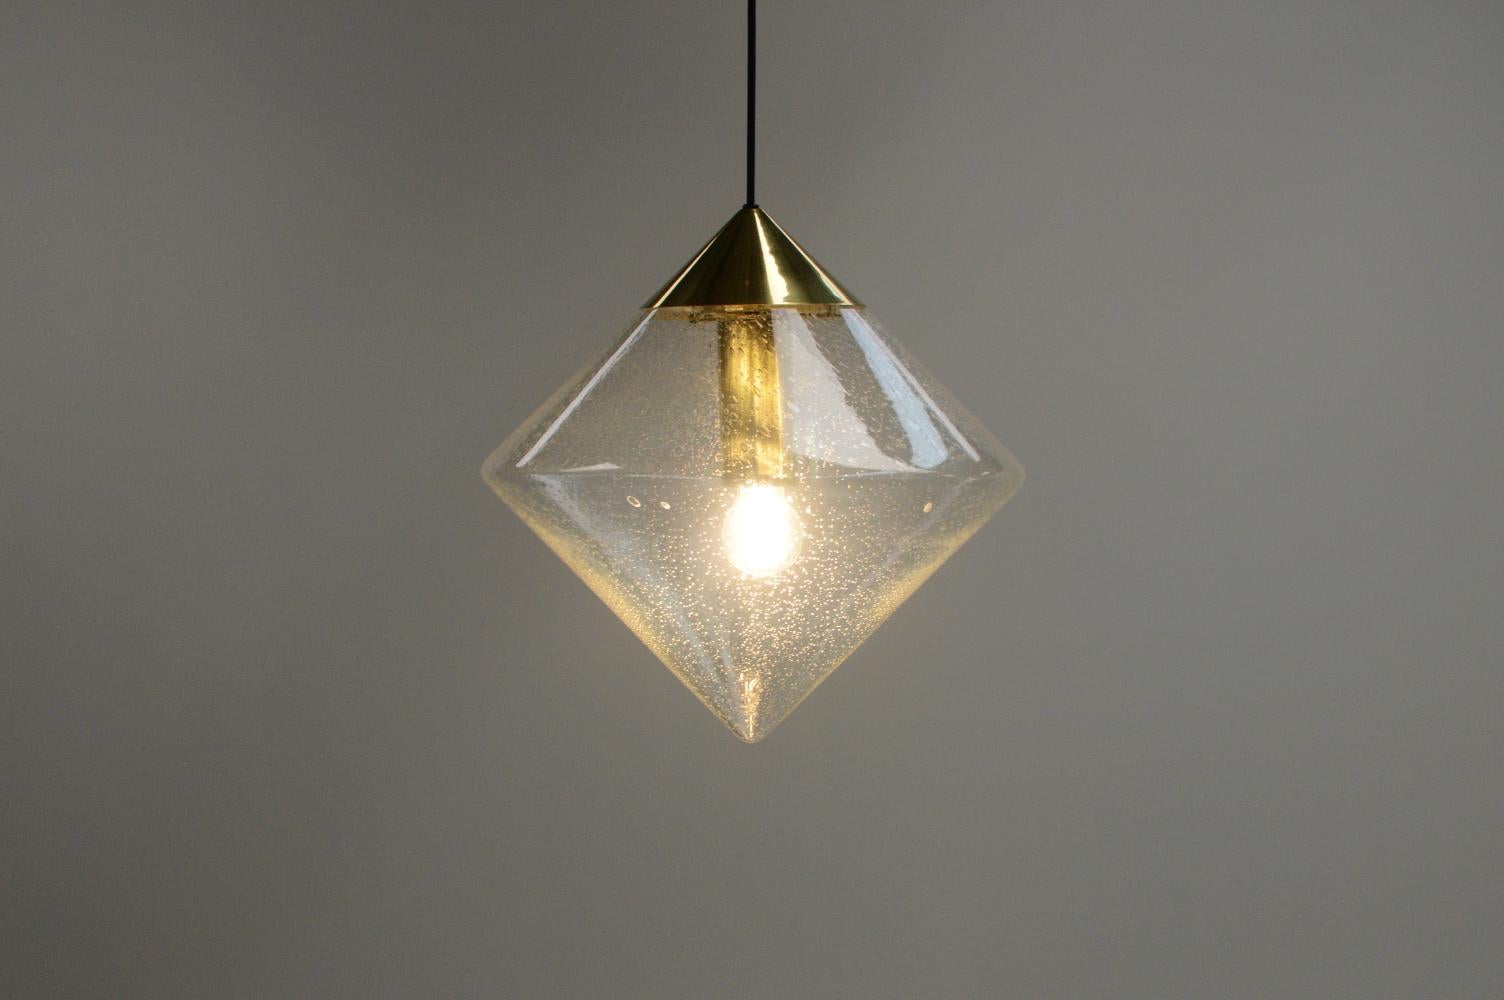 Mid-Century Modern Rare B-1218 pendant by Raak Amsterdam, 1970s The Netherlands.  For Sale